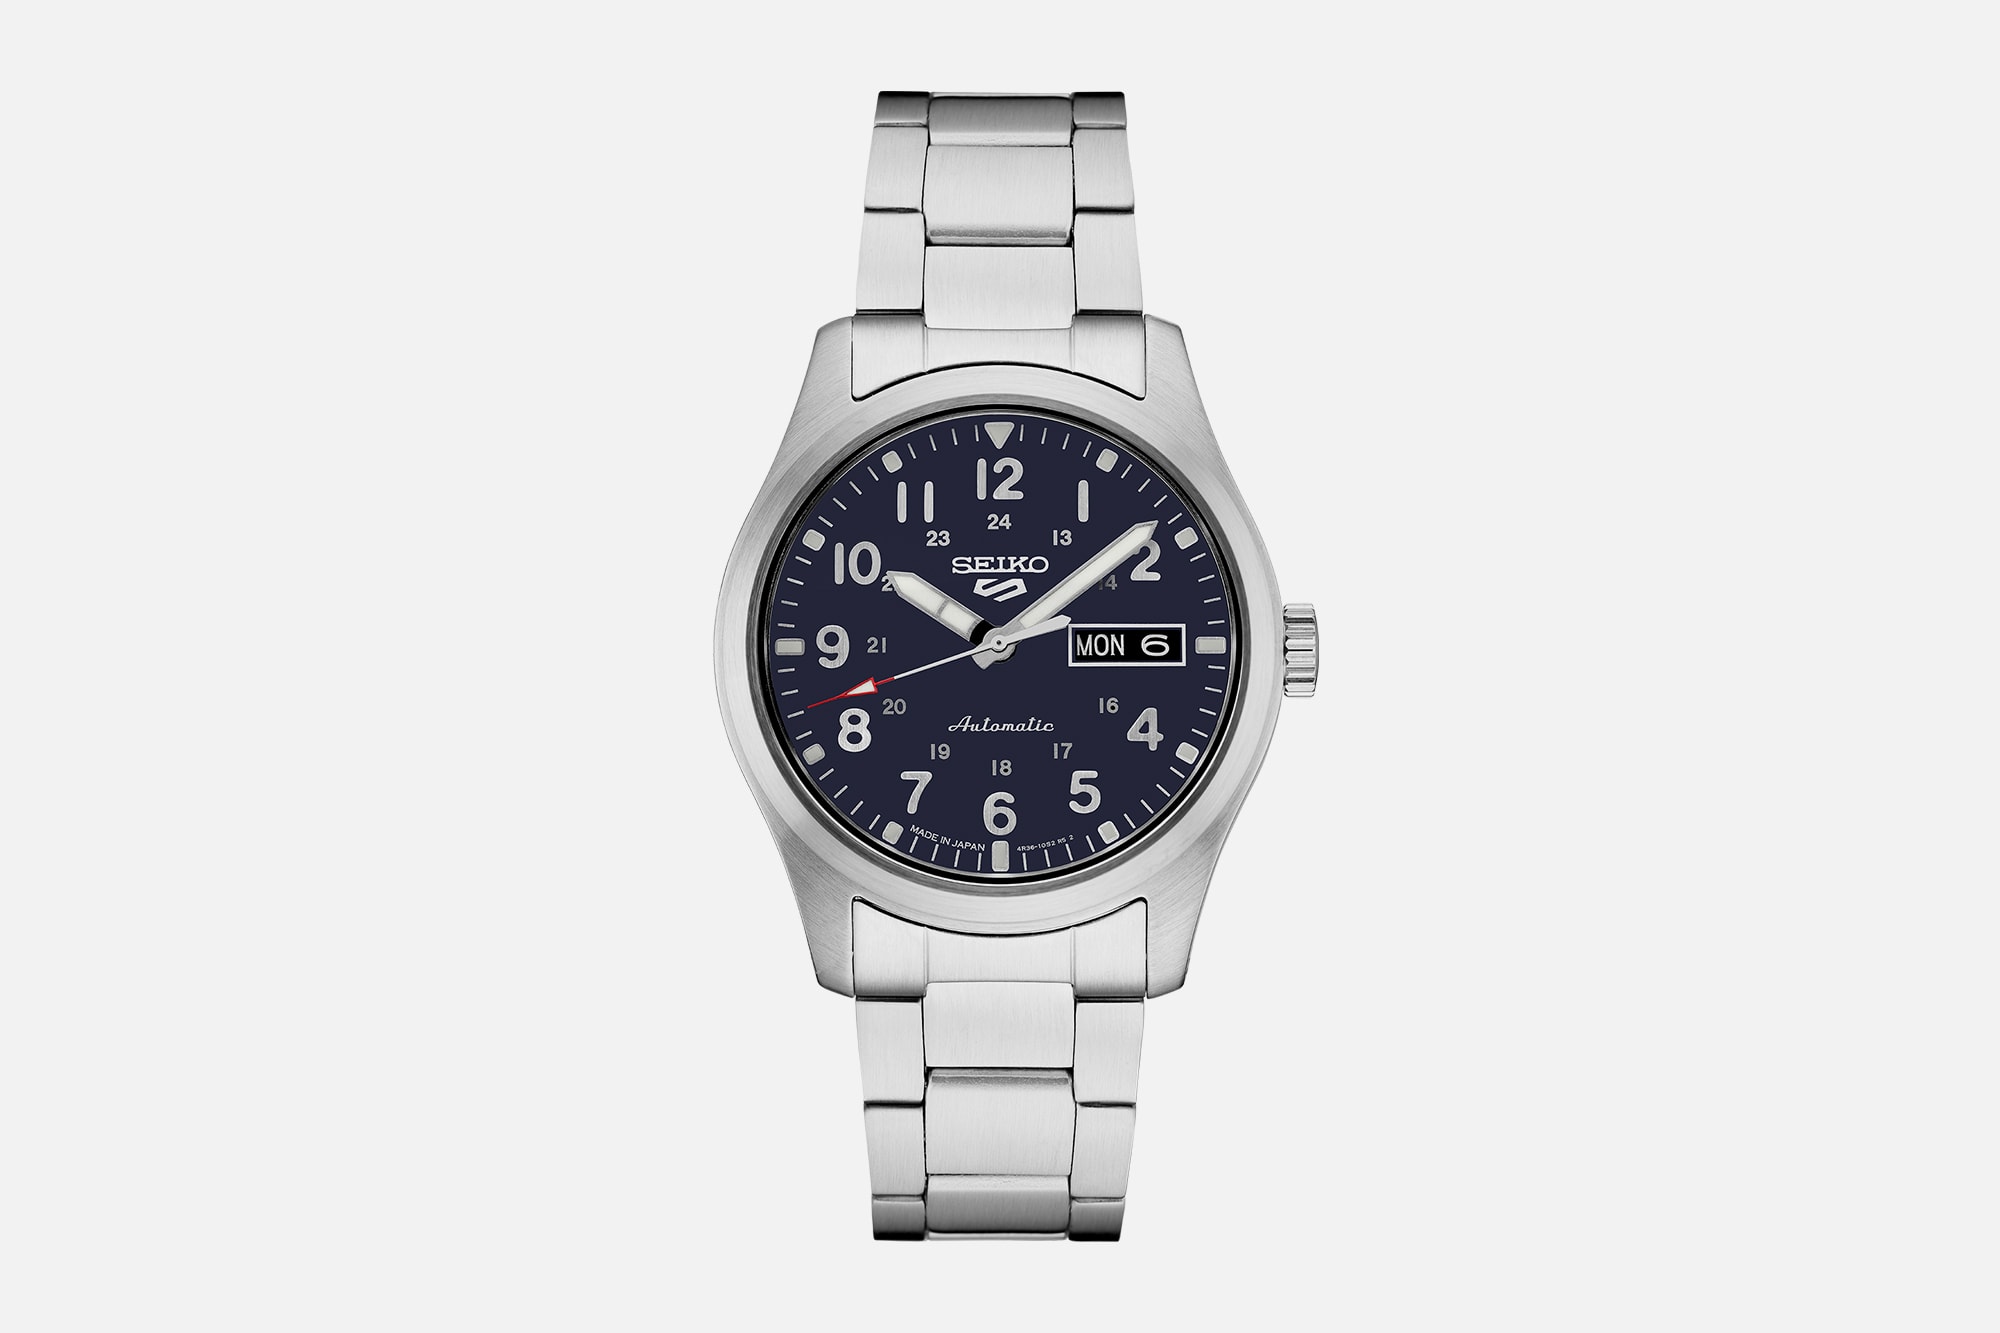 The Seiko 5 Sports Line is Refreshed with a New Field Watch Style